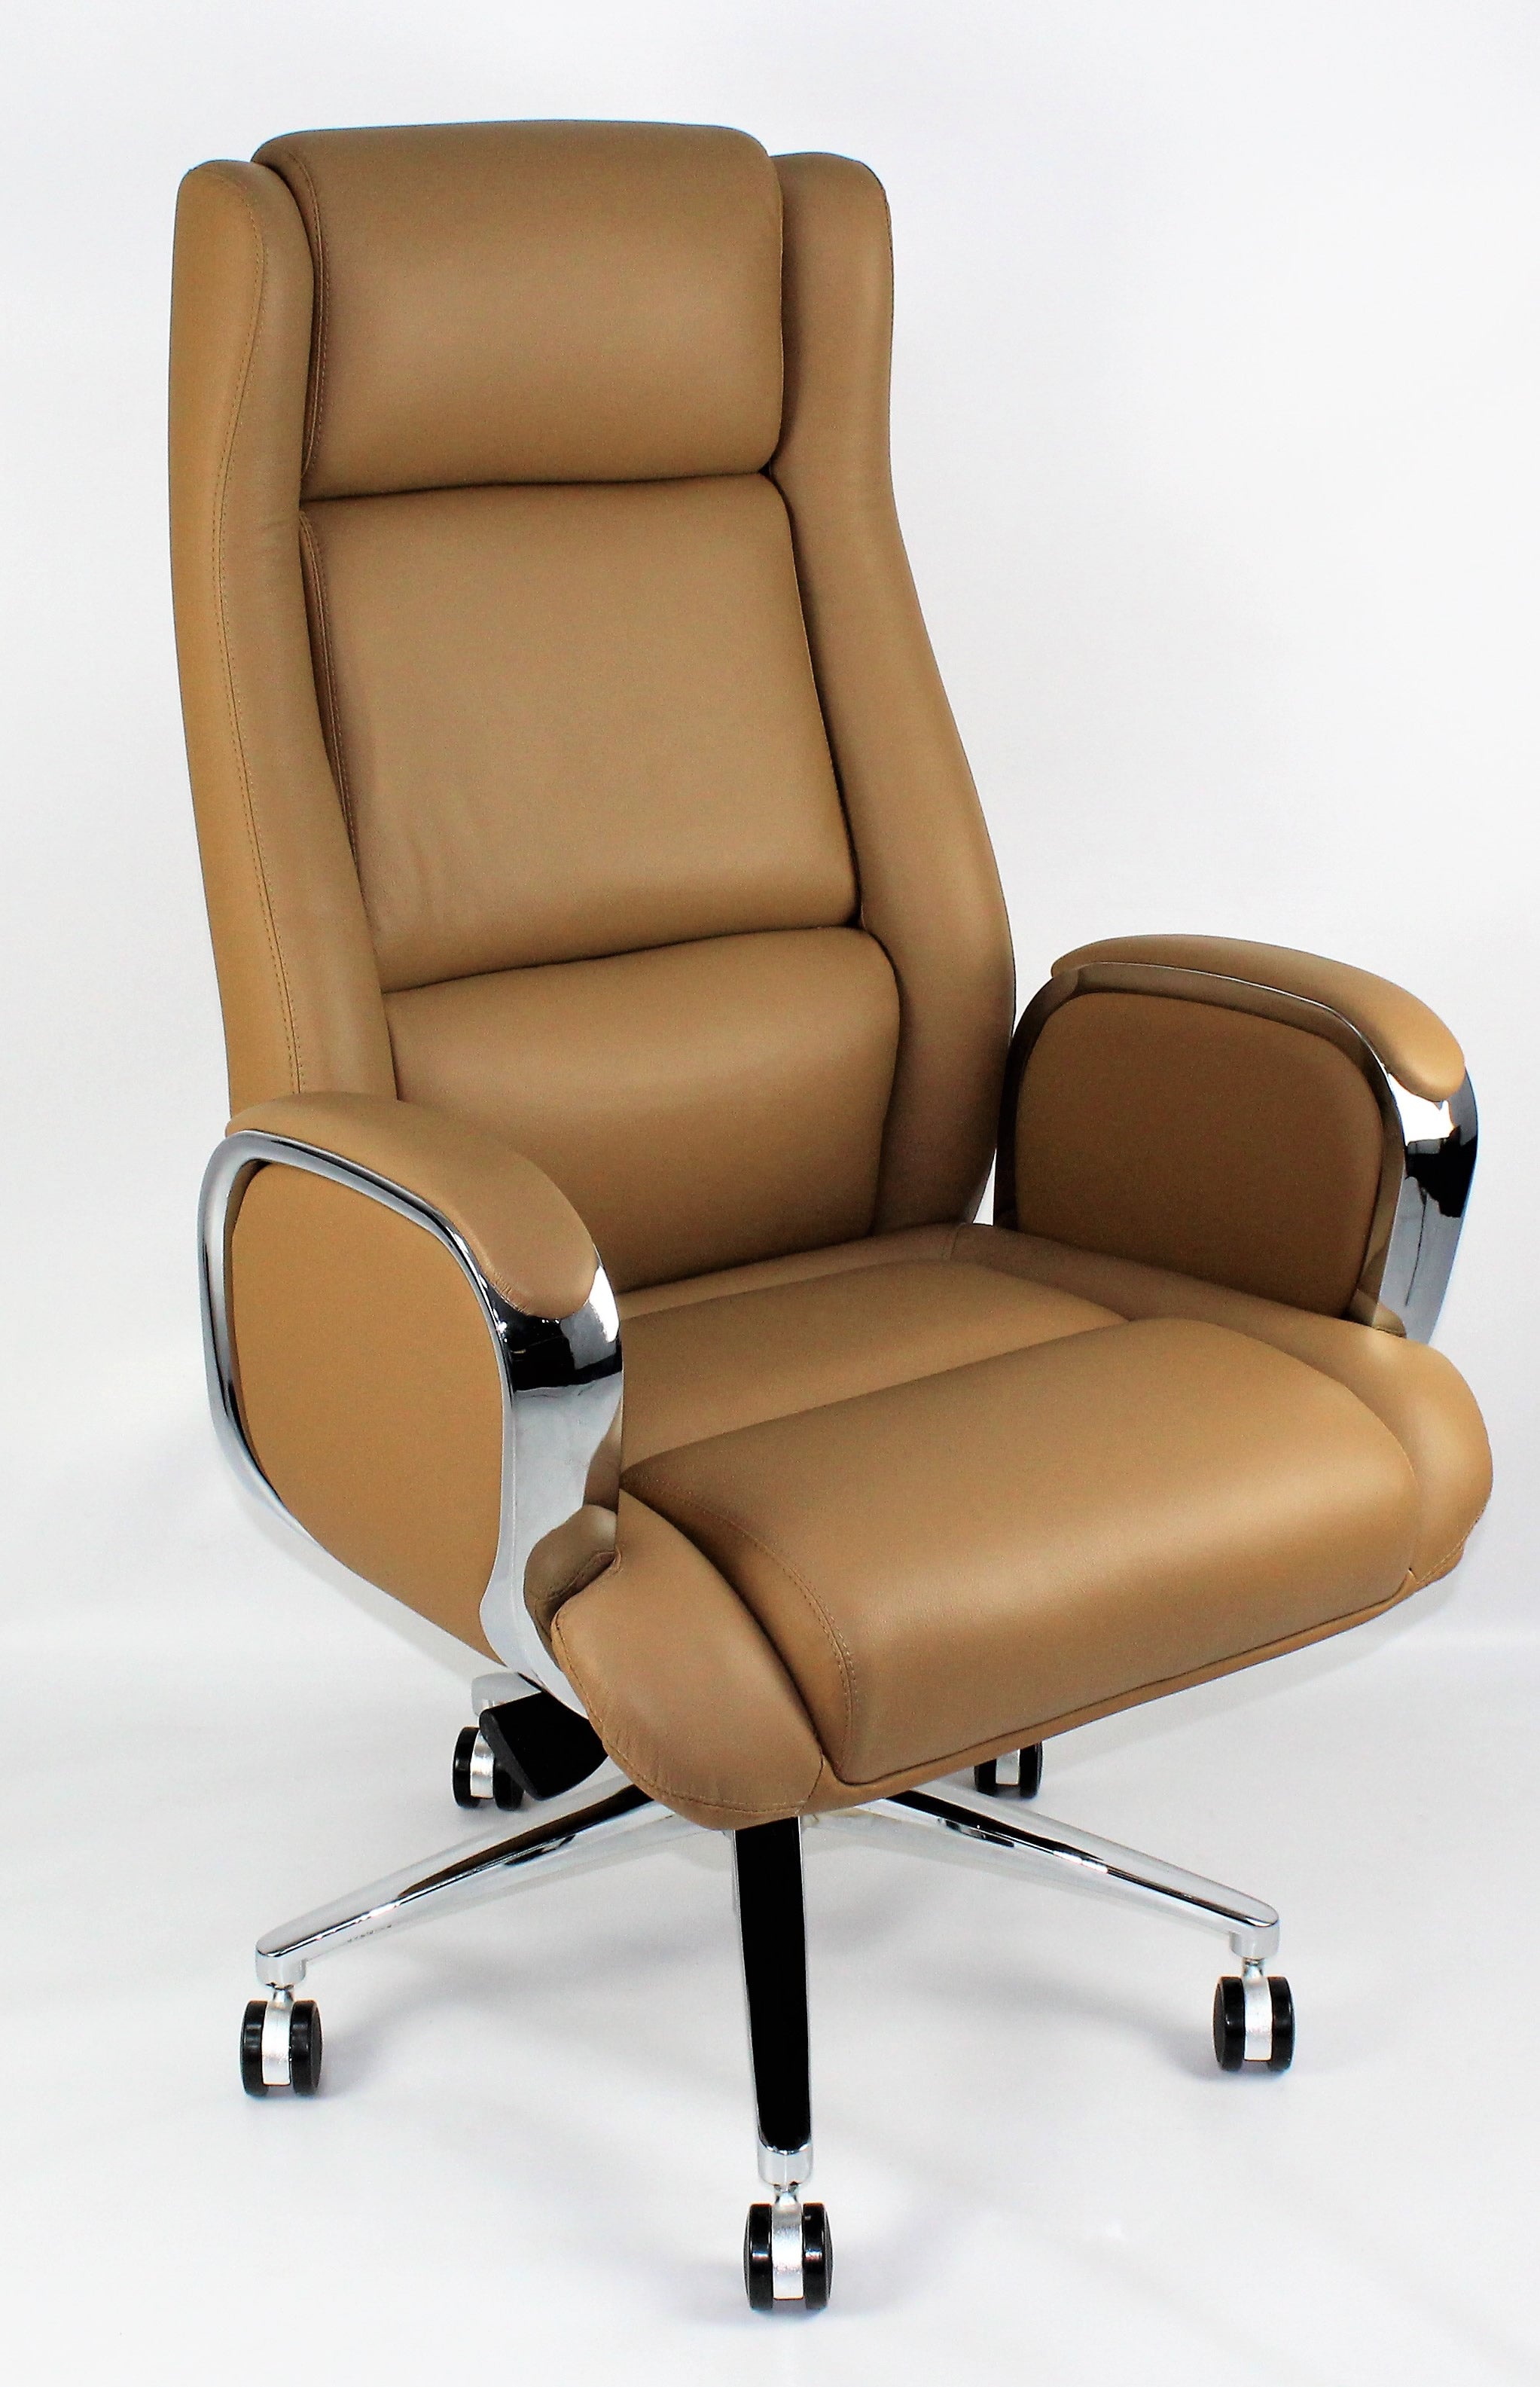 Beige Leather Executive Office Chair with Chrome Trimmed Arms - J1201 Near Me